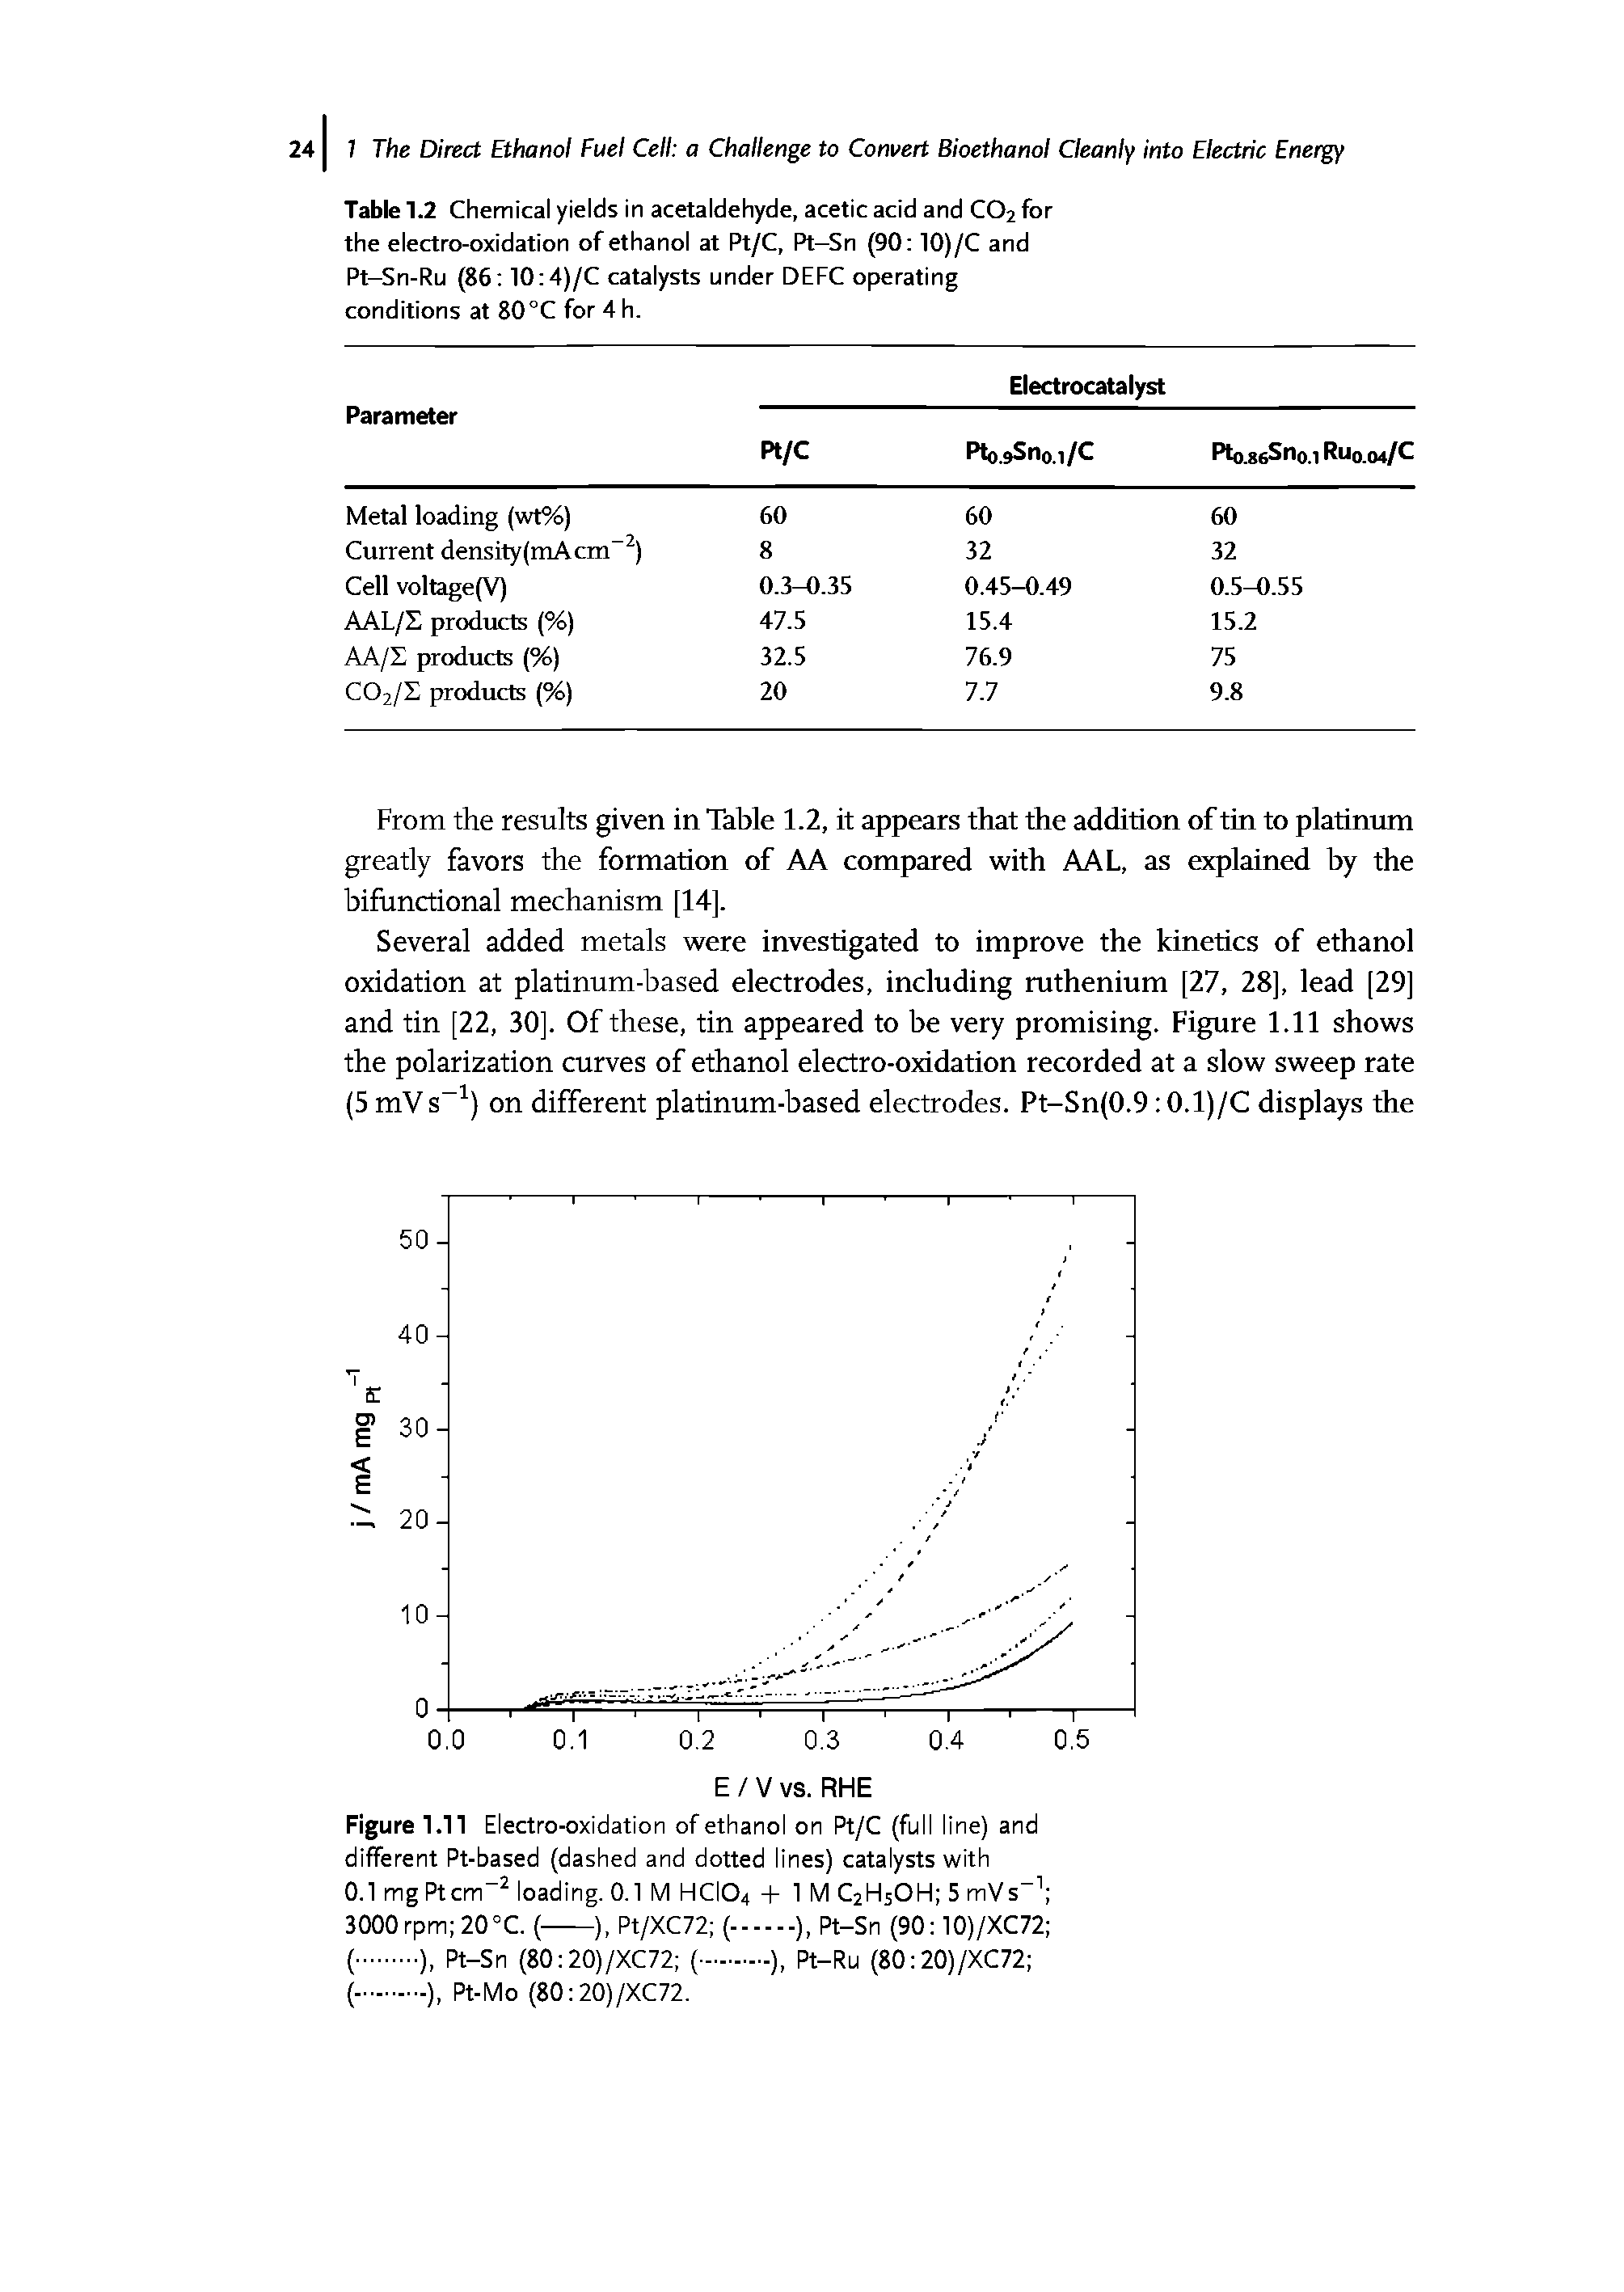 Table 1.2 Chemical yields in acetaldehyde, acetic acid and CO2 for the electro-oxidation of ethanol at Pt/C, Pt-Sn (90 10)/C and Pt-Sn-Ru (86 10 4)/C catalysts under DEFC operating conditions at 80 °C for 4 h.